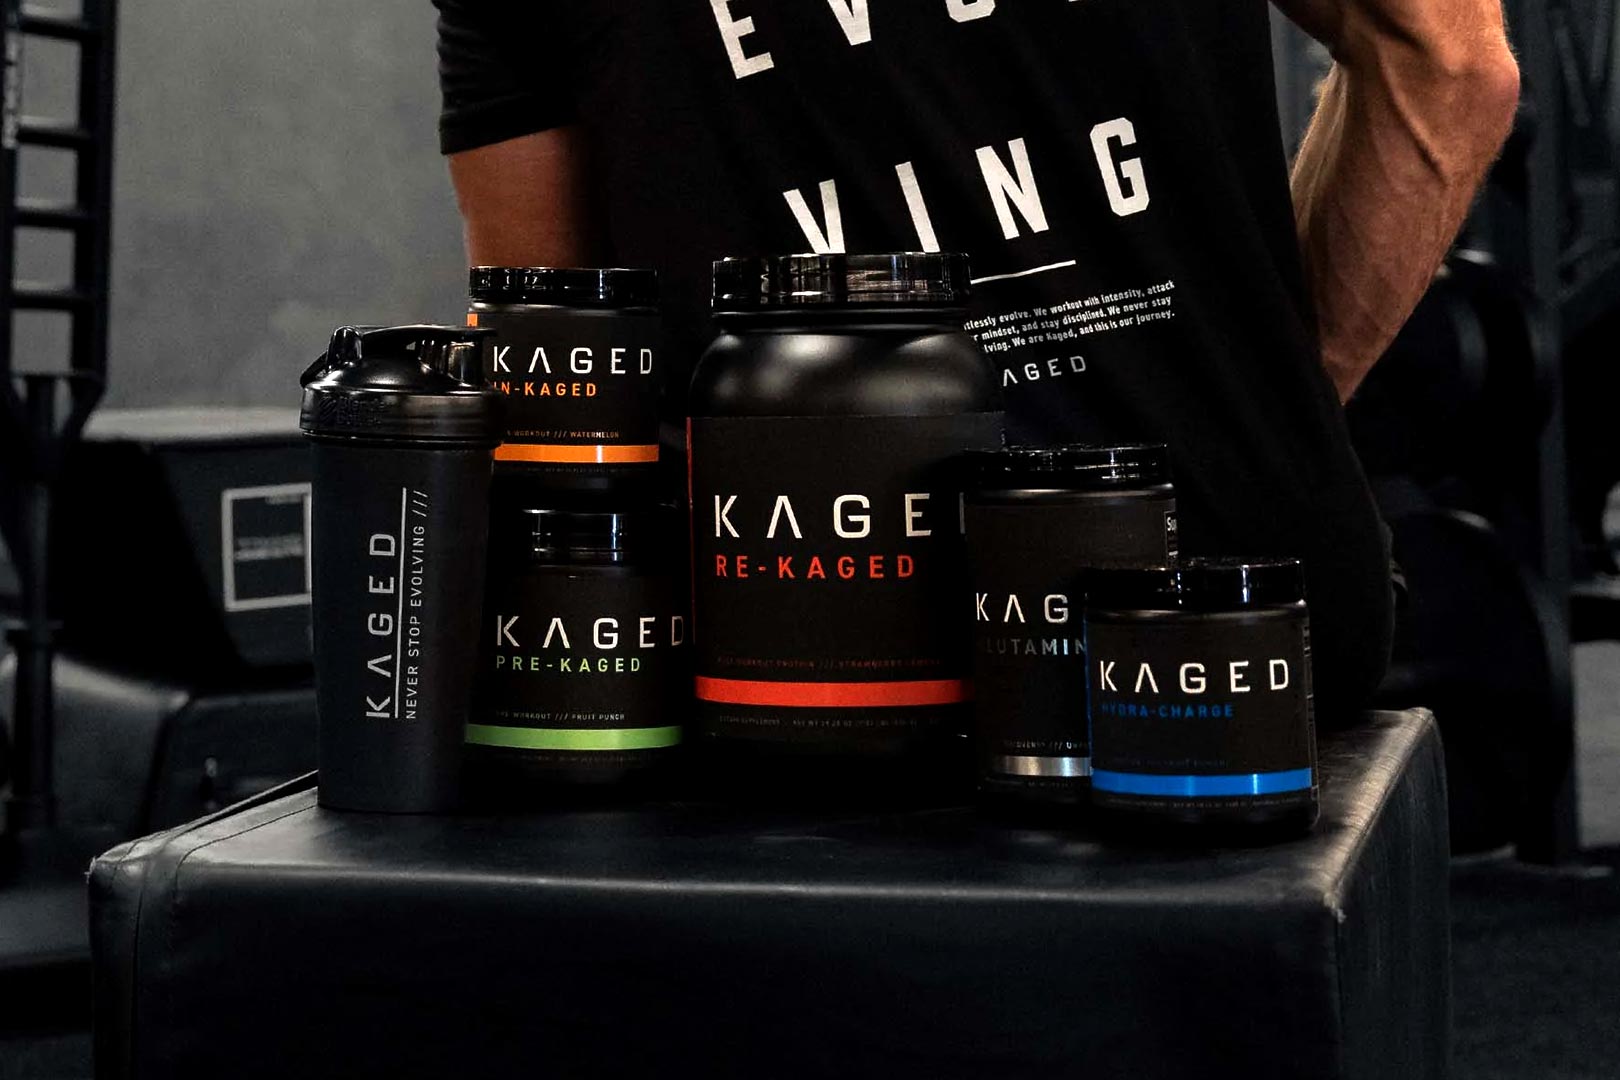 Kaged Help Page For Discontinued Products